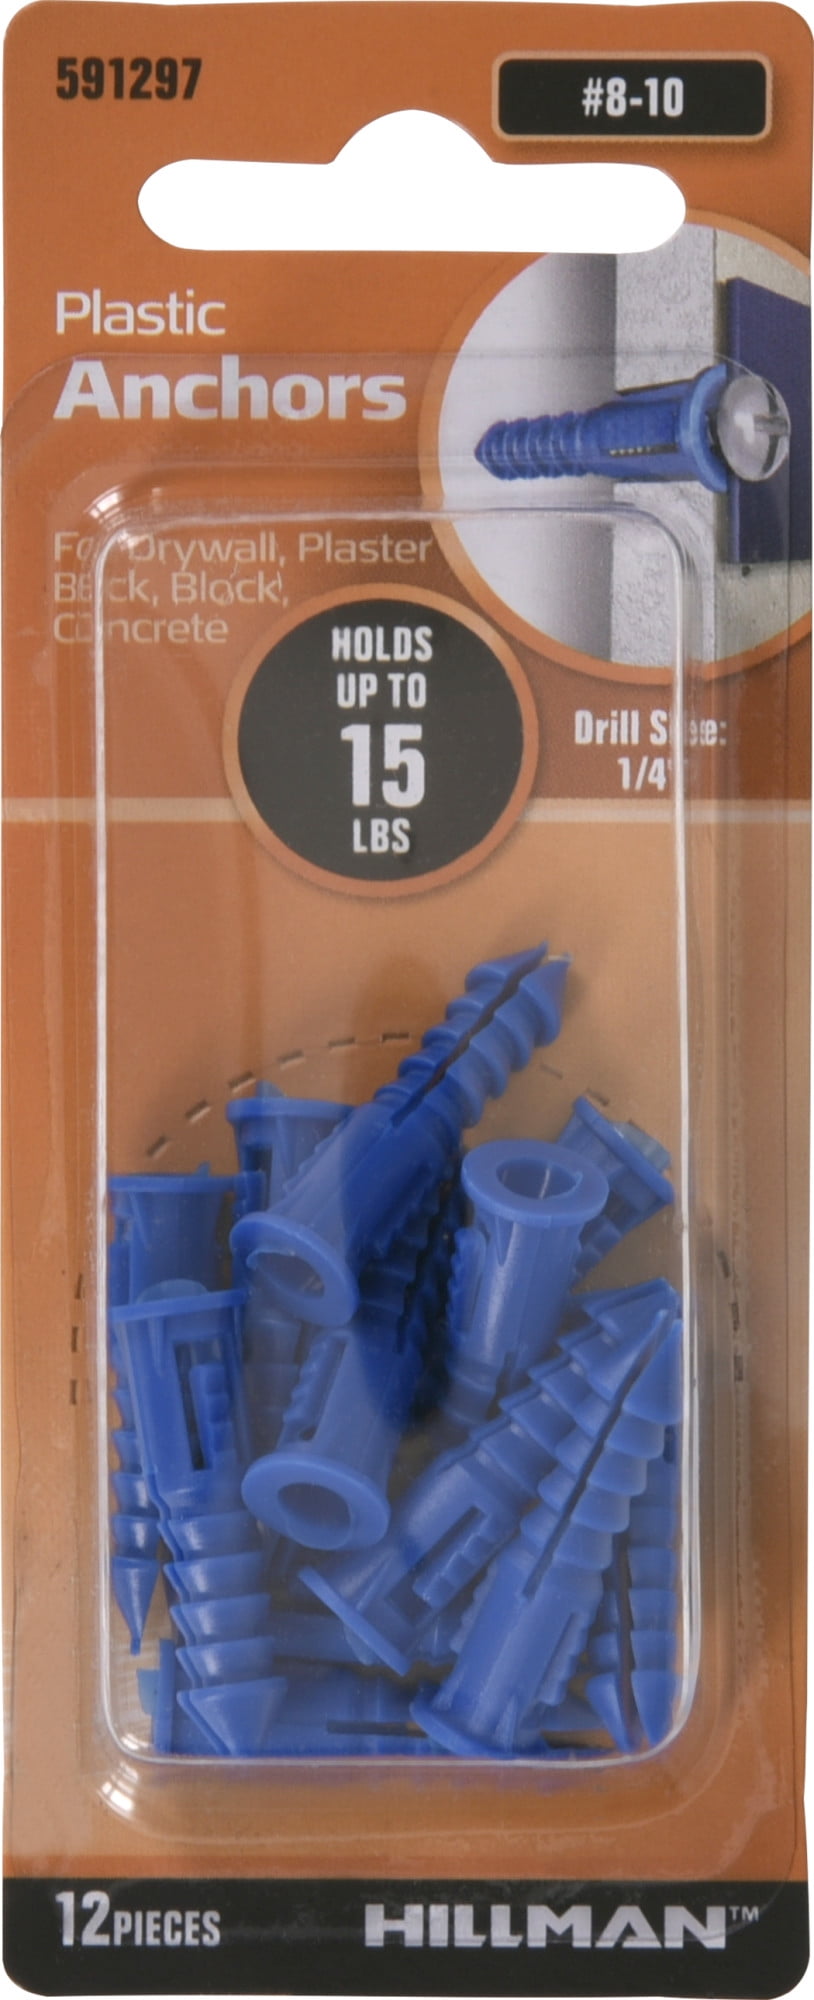 40 Plastic Anchors & Screws The Hillman Group Plastic Anchor with #10-12 Screws 1-1/4 Inch 